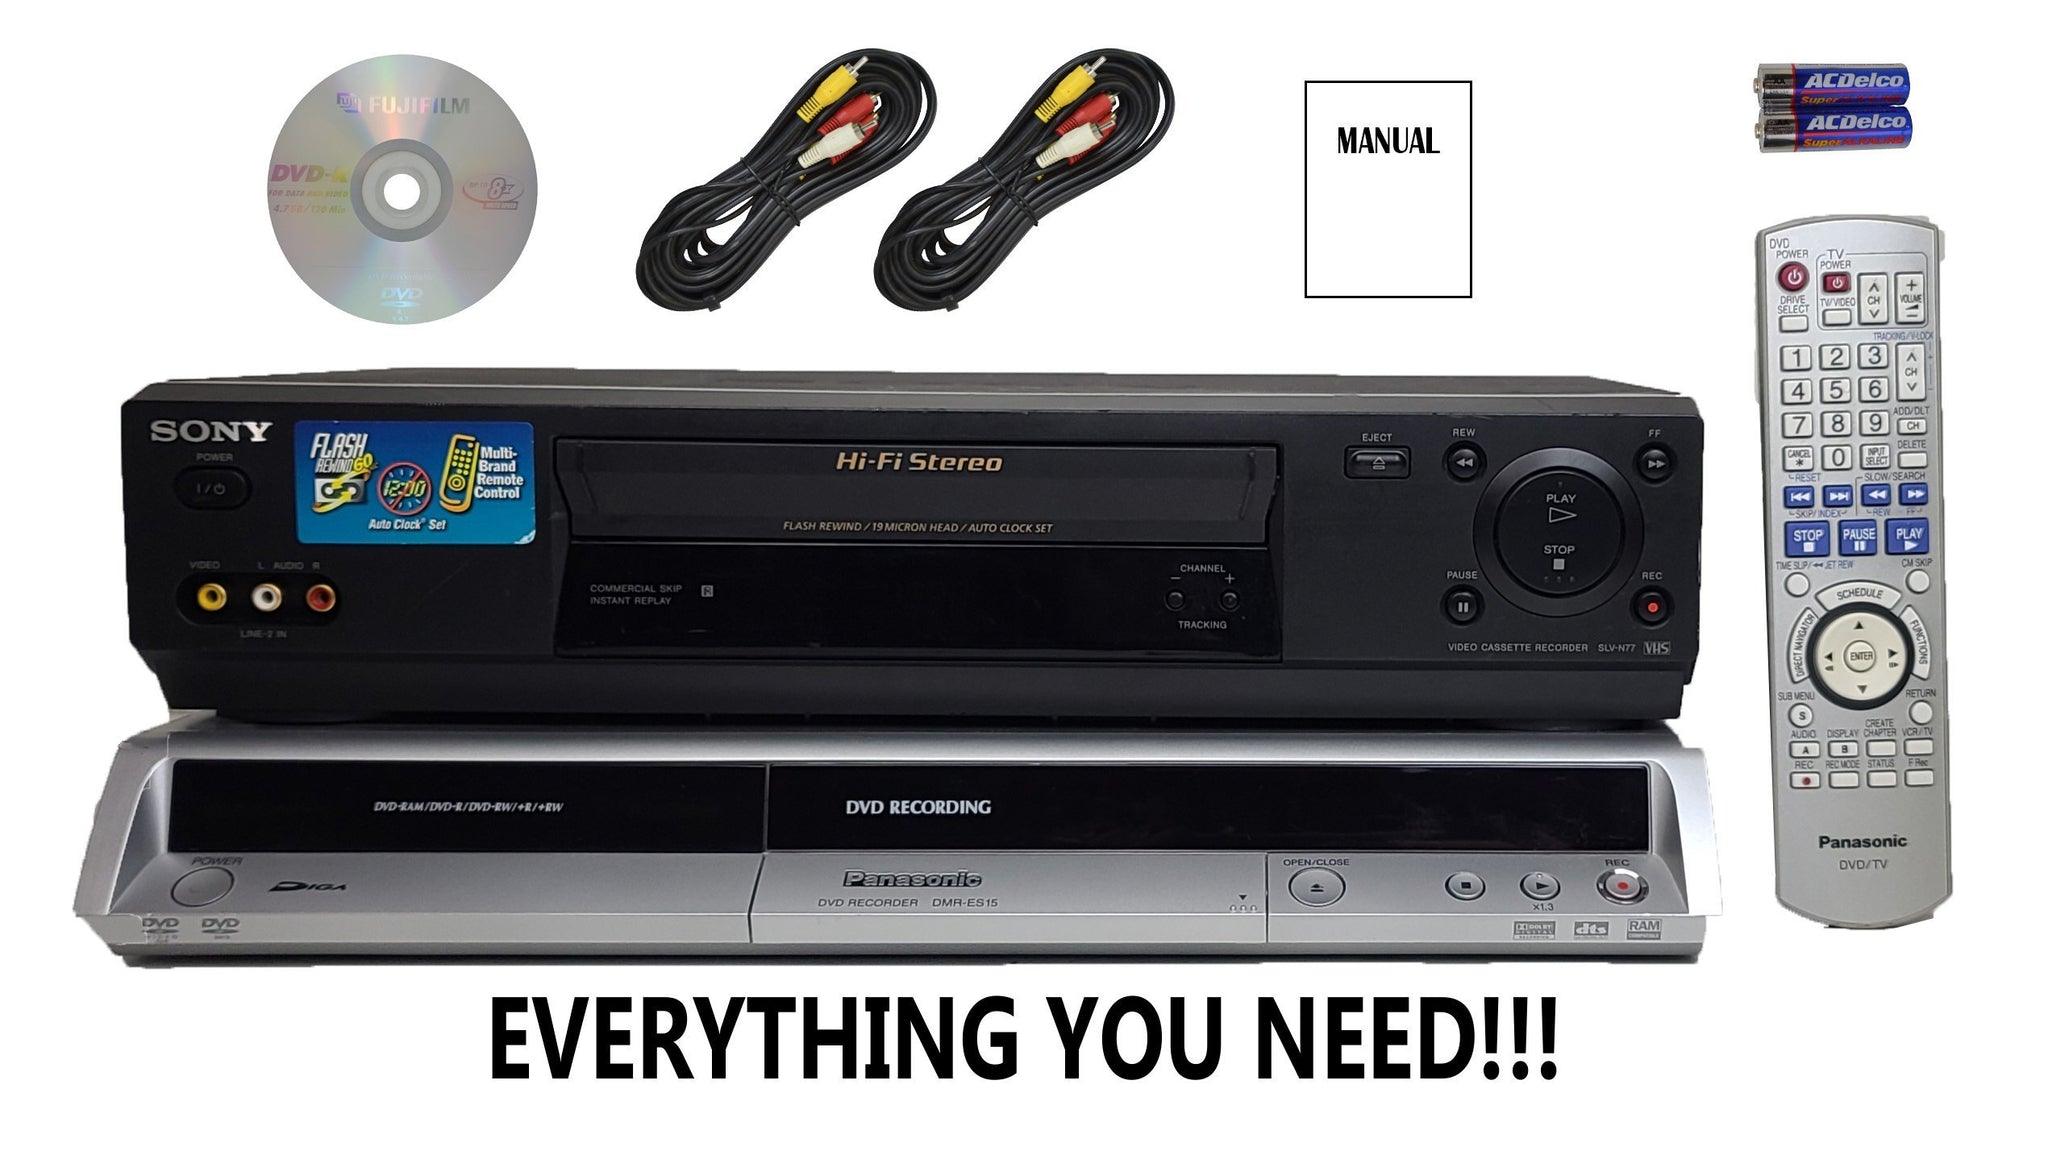 VCR to PC hookup copy transfer VHS to DVD